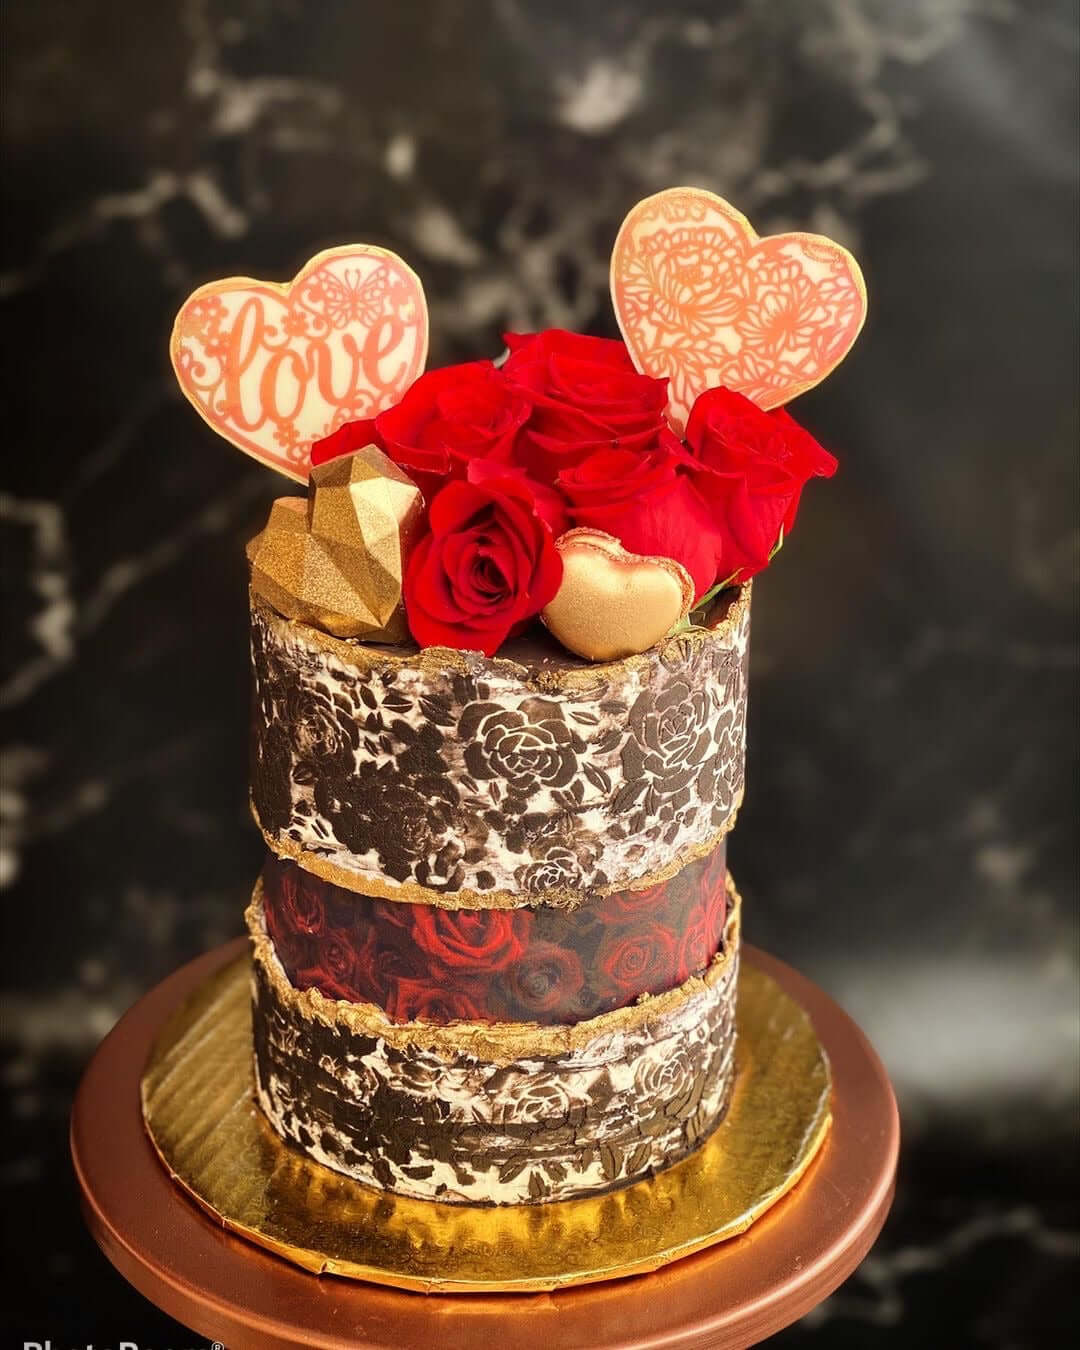 Red Roses Love and Romantic - Icing - ISA198.